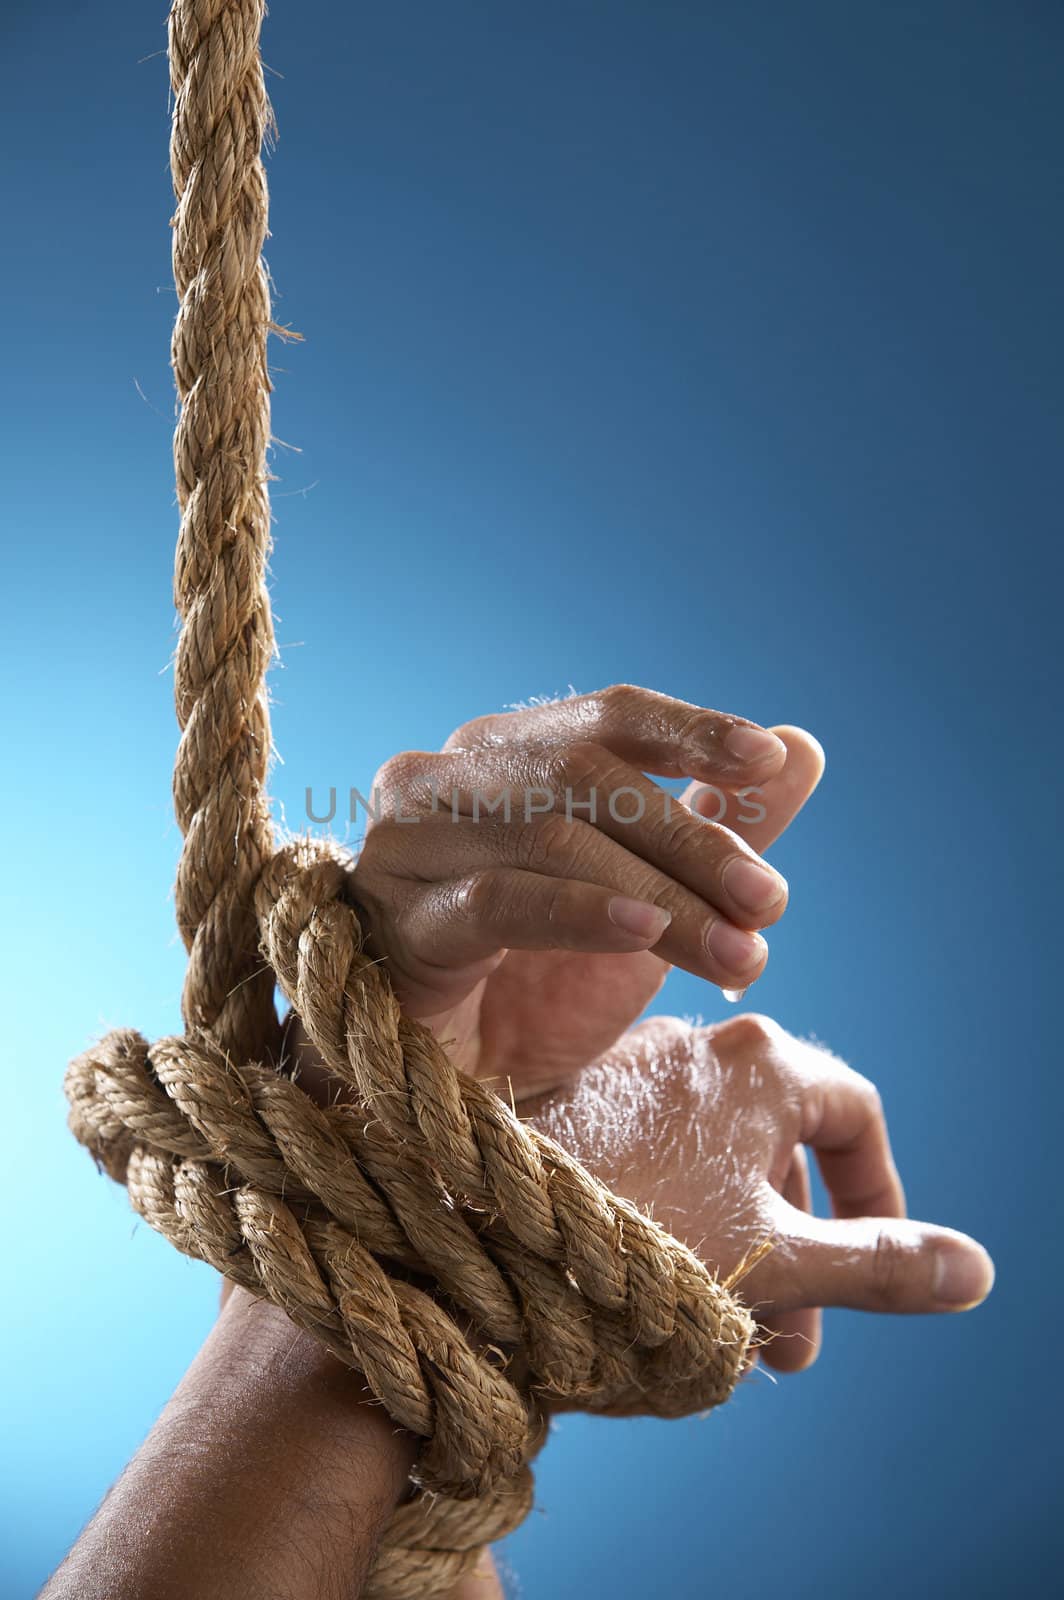 hand being tight by rope asking for help